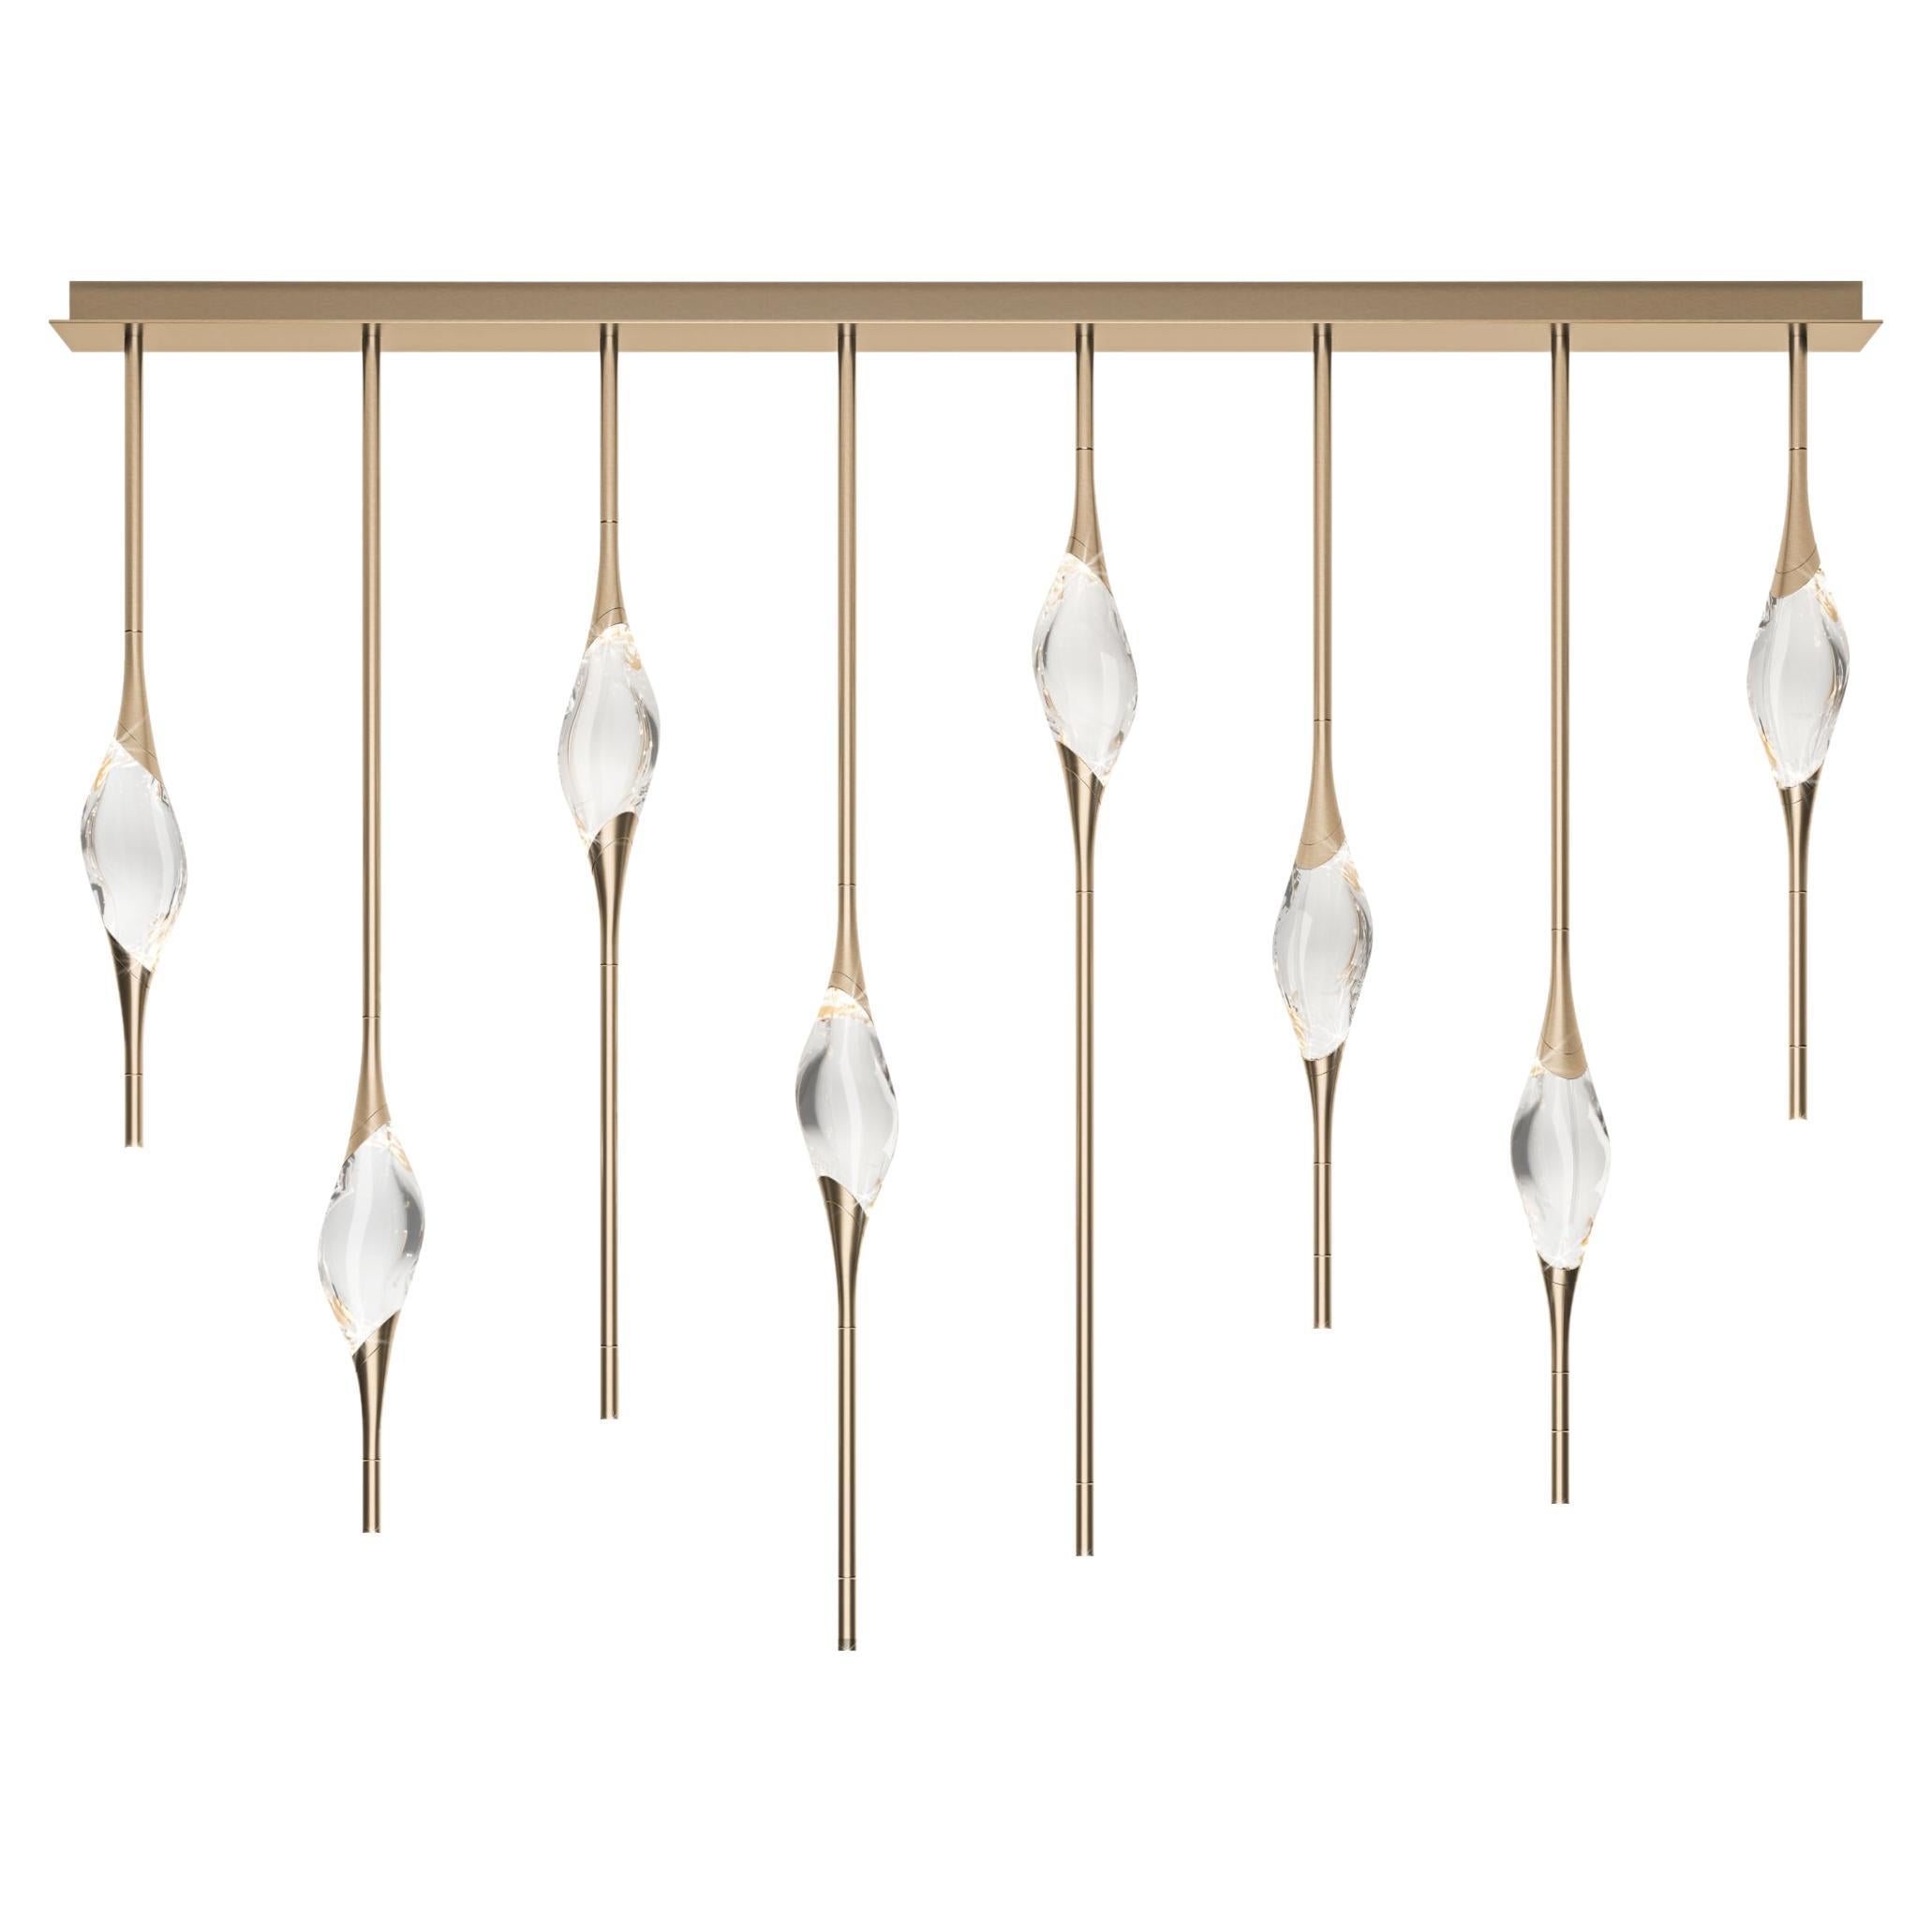 "Il Pezzo 12 Staggered Chandelier" - length 160cm/63” - satin brass - crystal For Sale